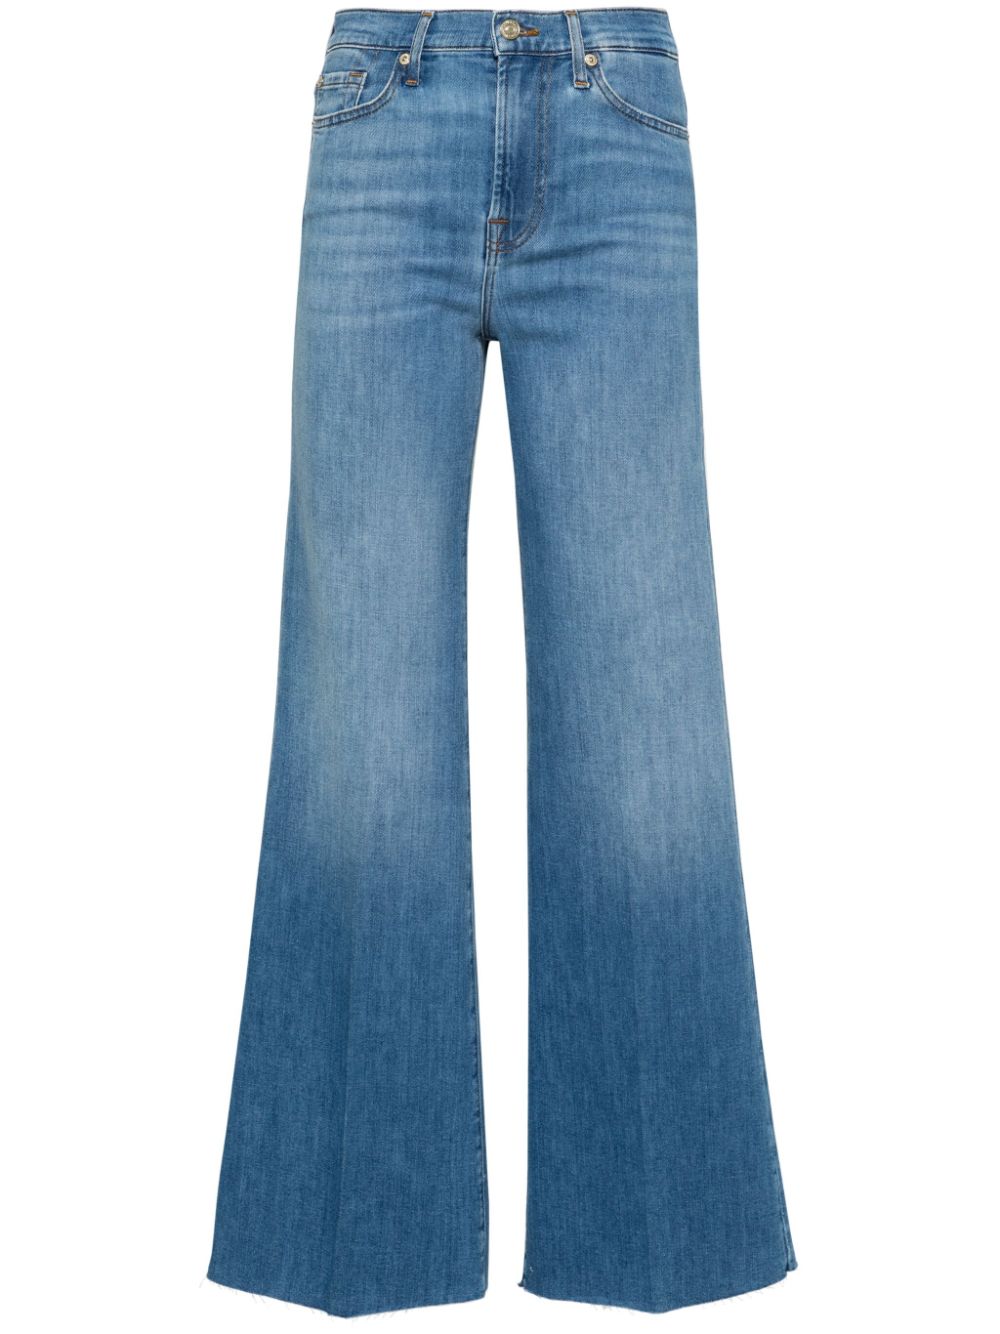 7 For All Mankind Modern Dojo high-waist flared jeans - Blue von 7 For All Mankind